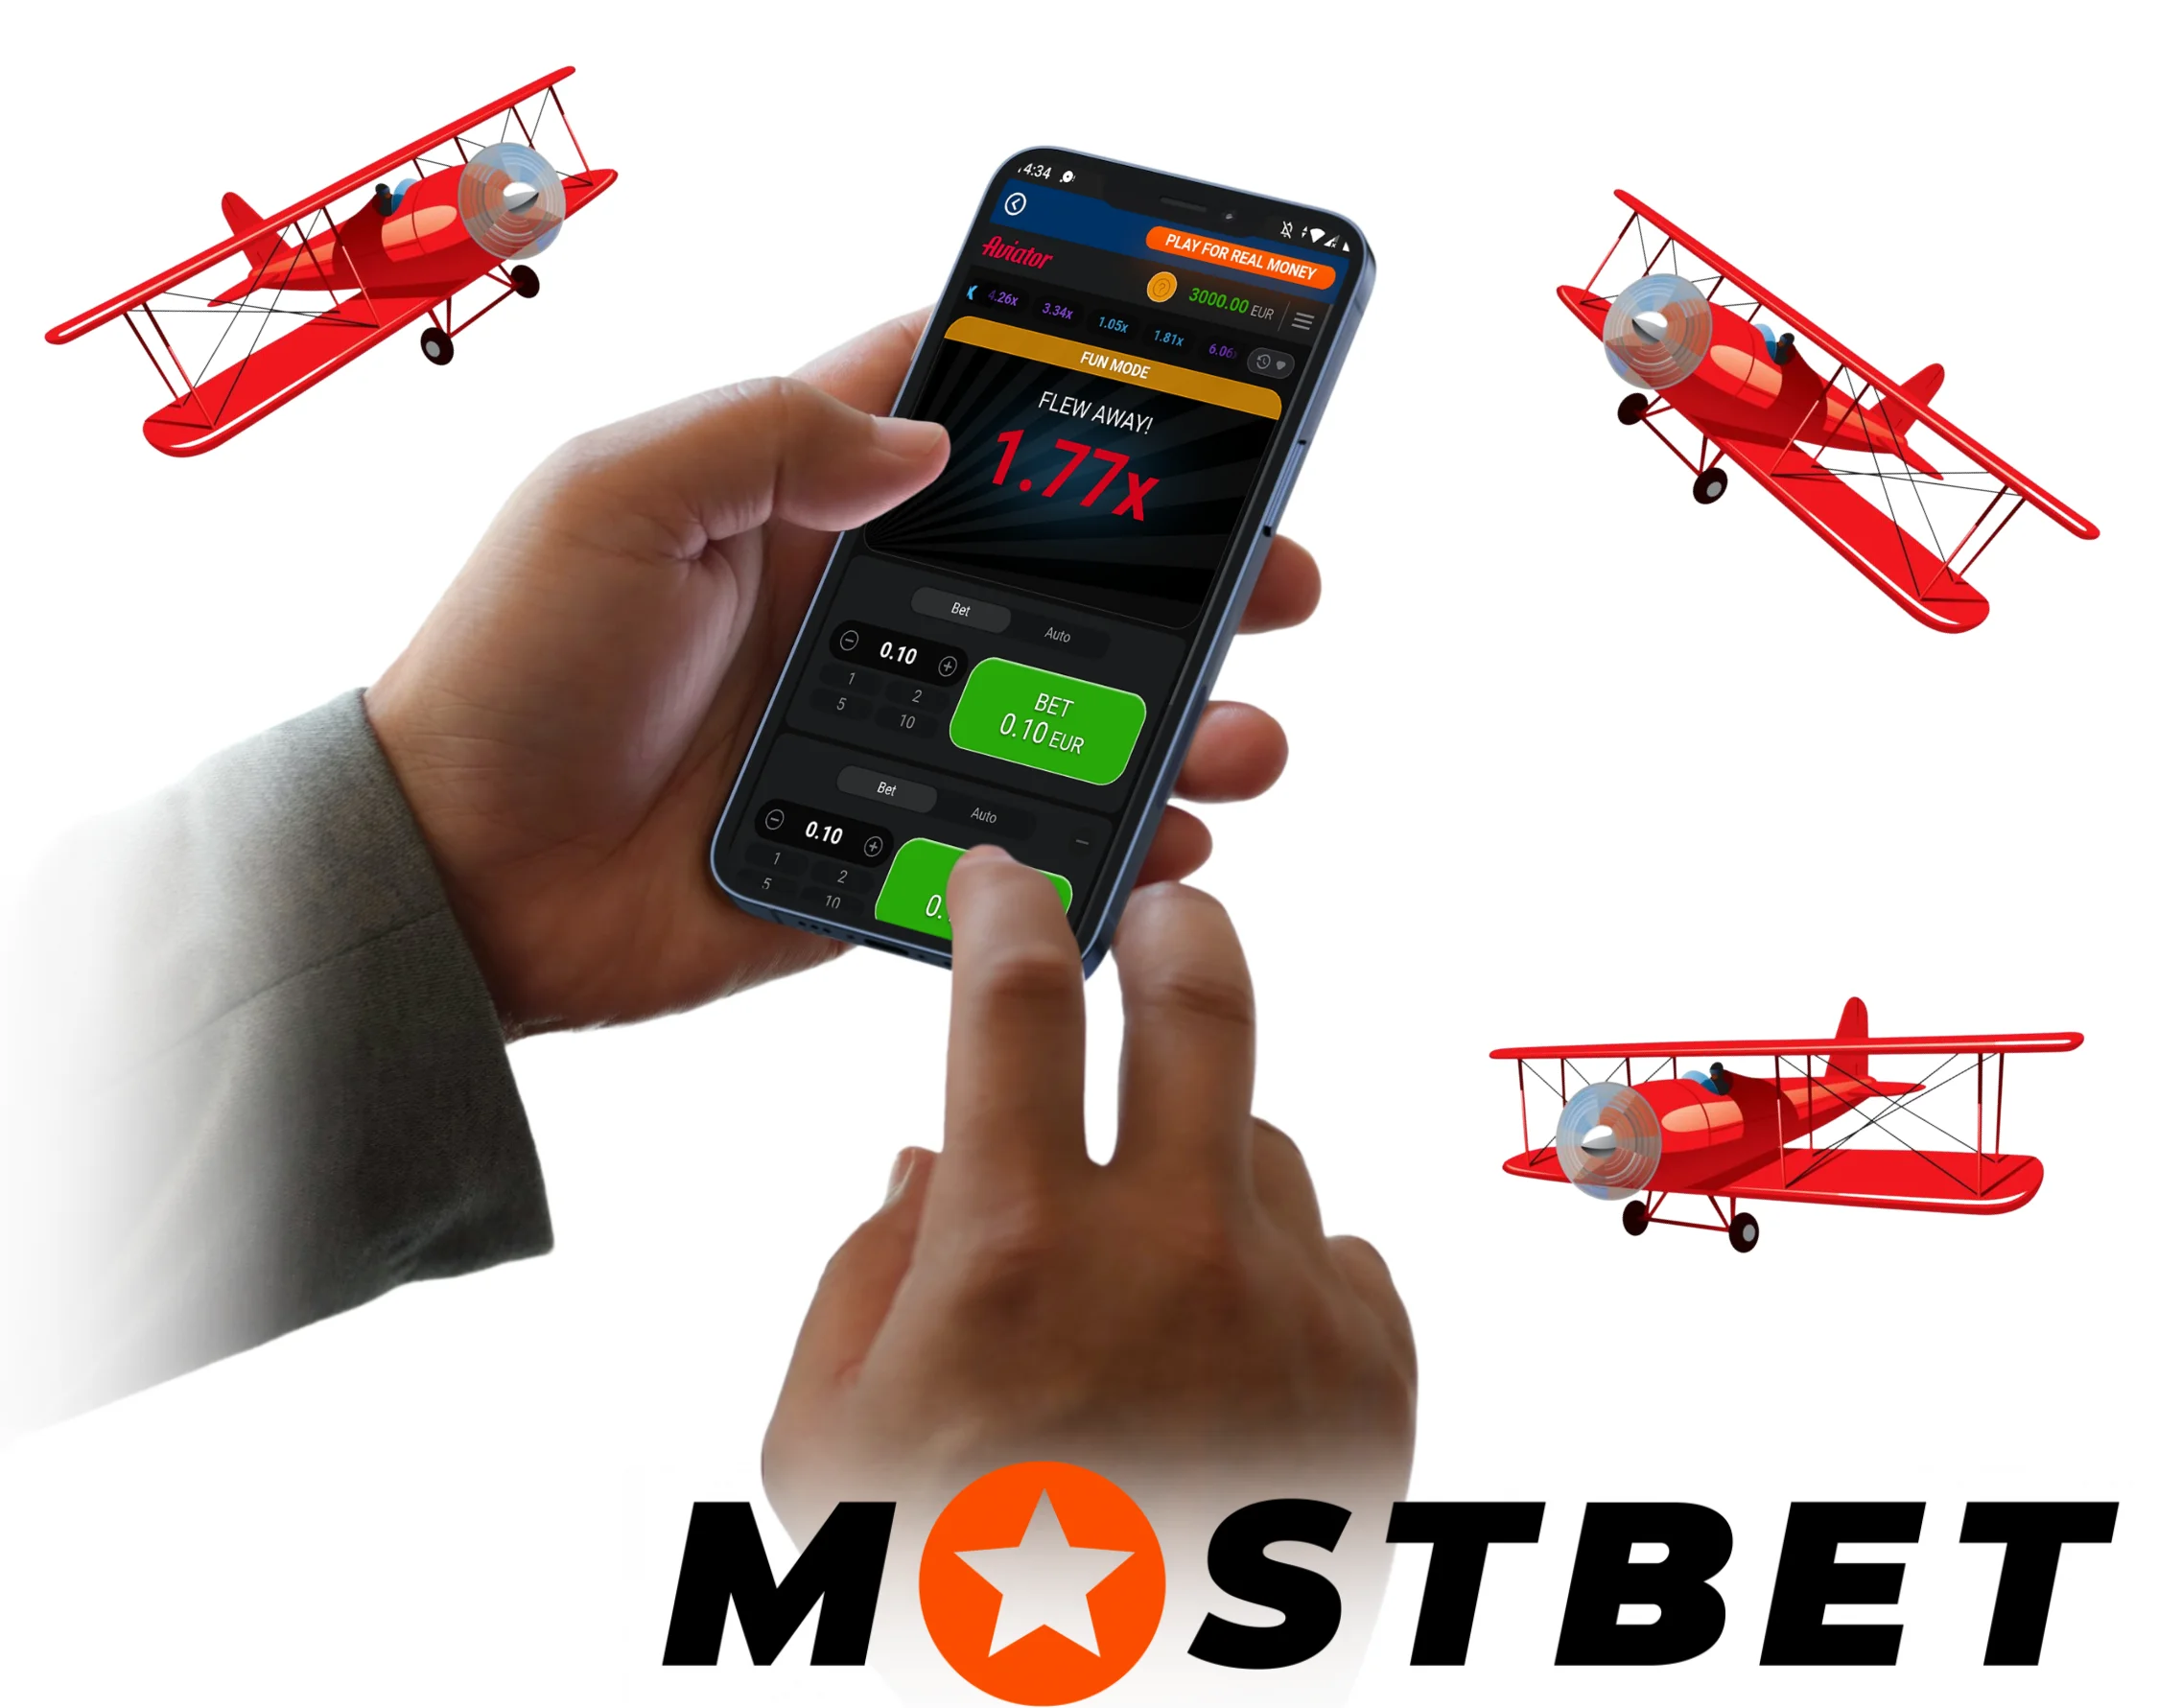 Mostbet betting and online casino in Azerbaijan Consulting – What The Heck Is That?